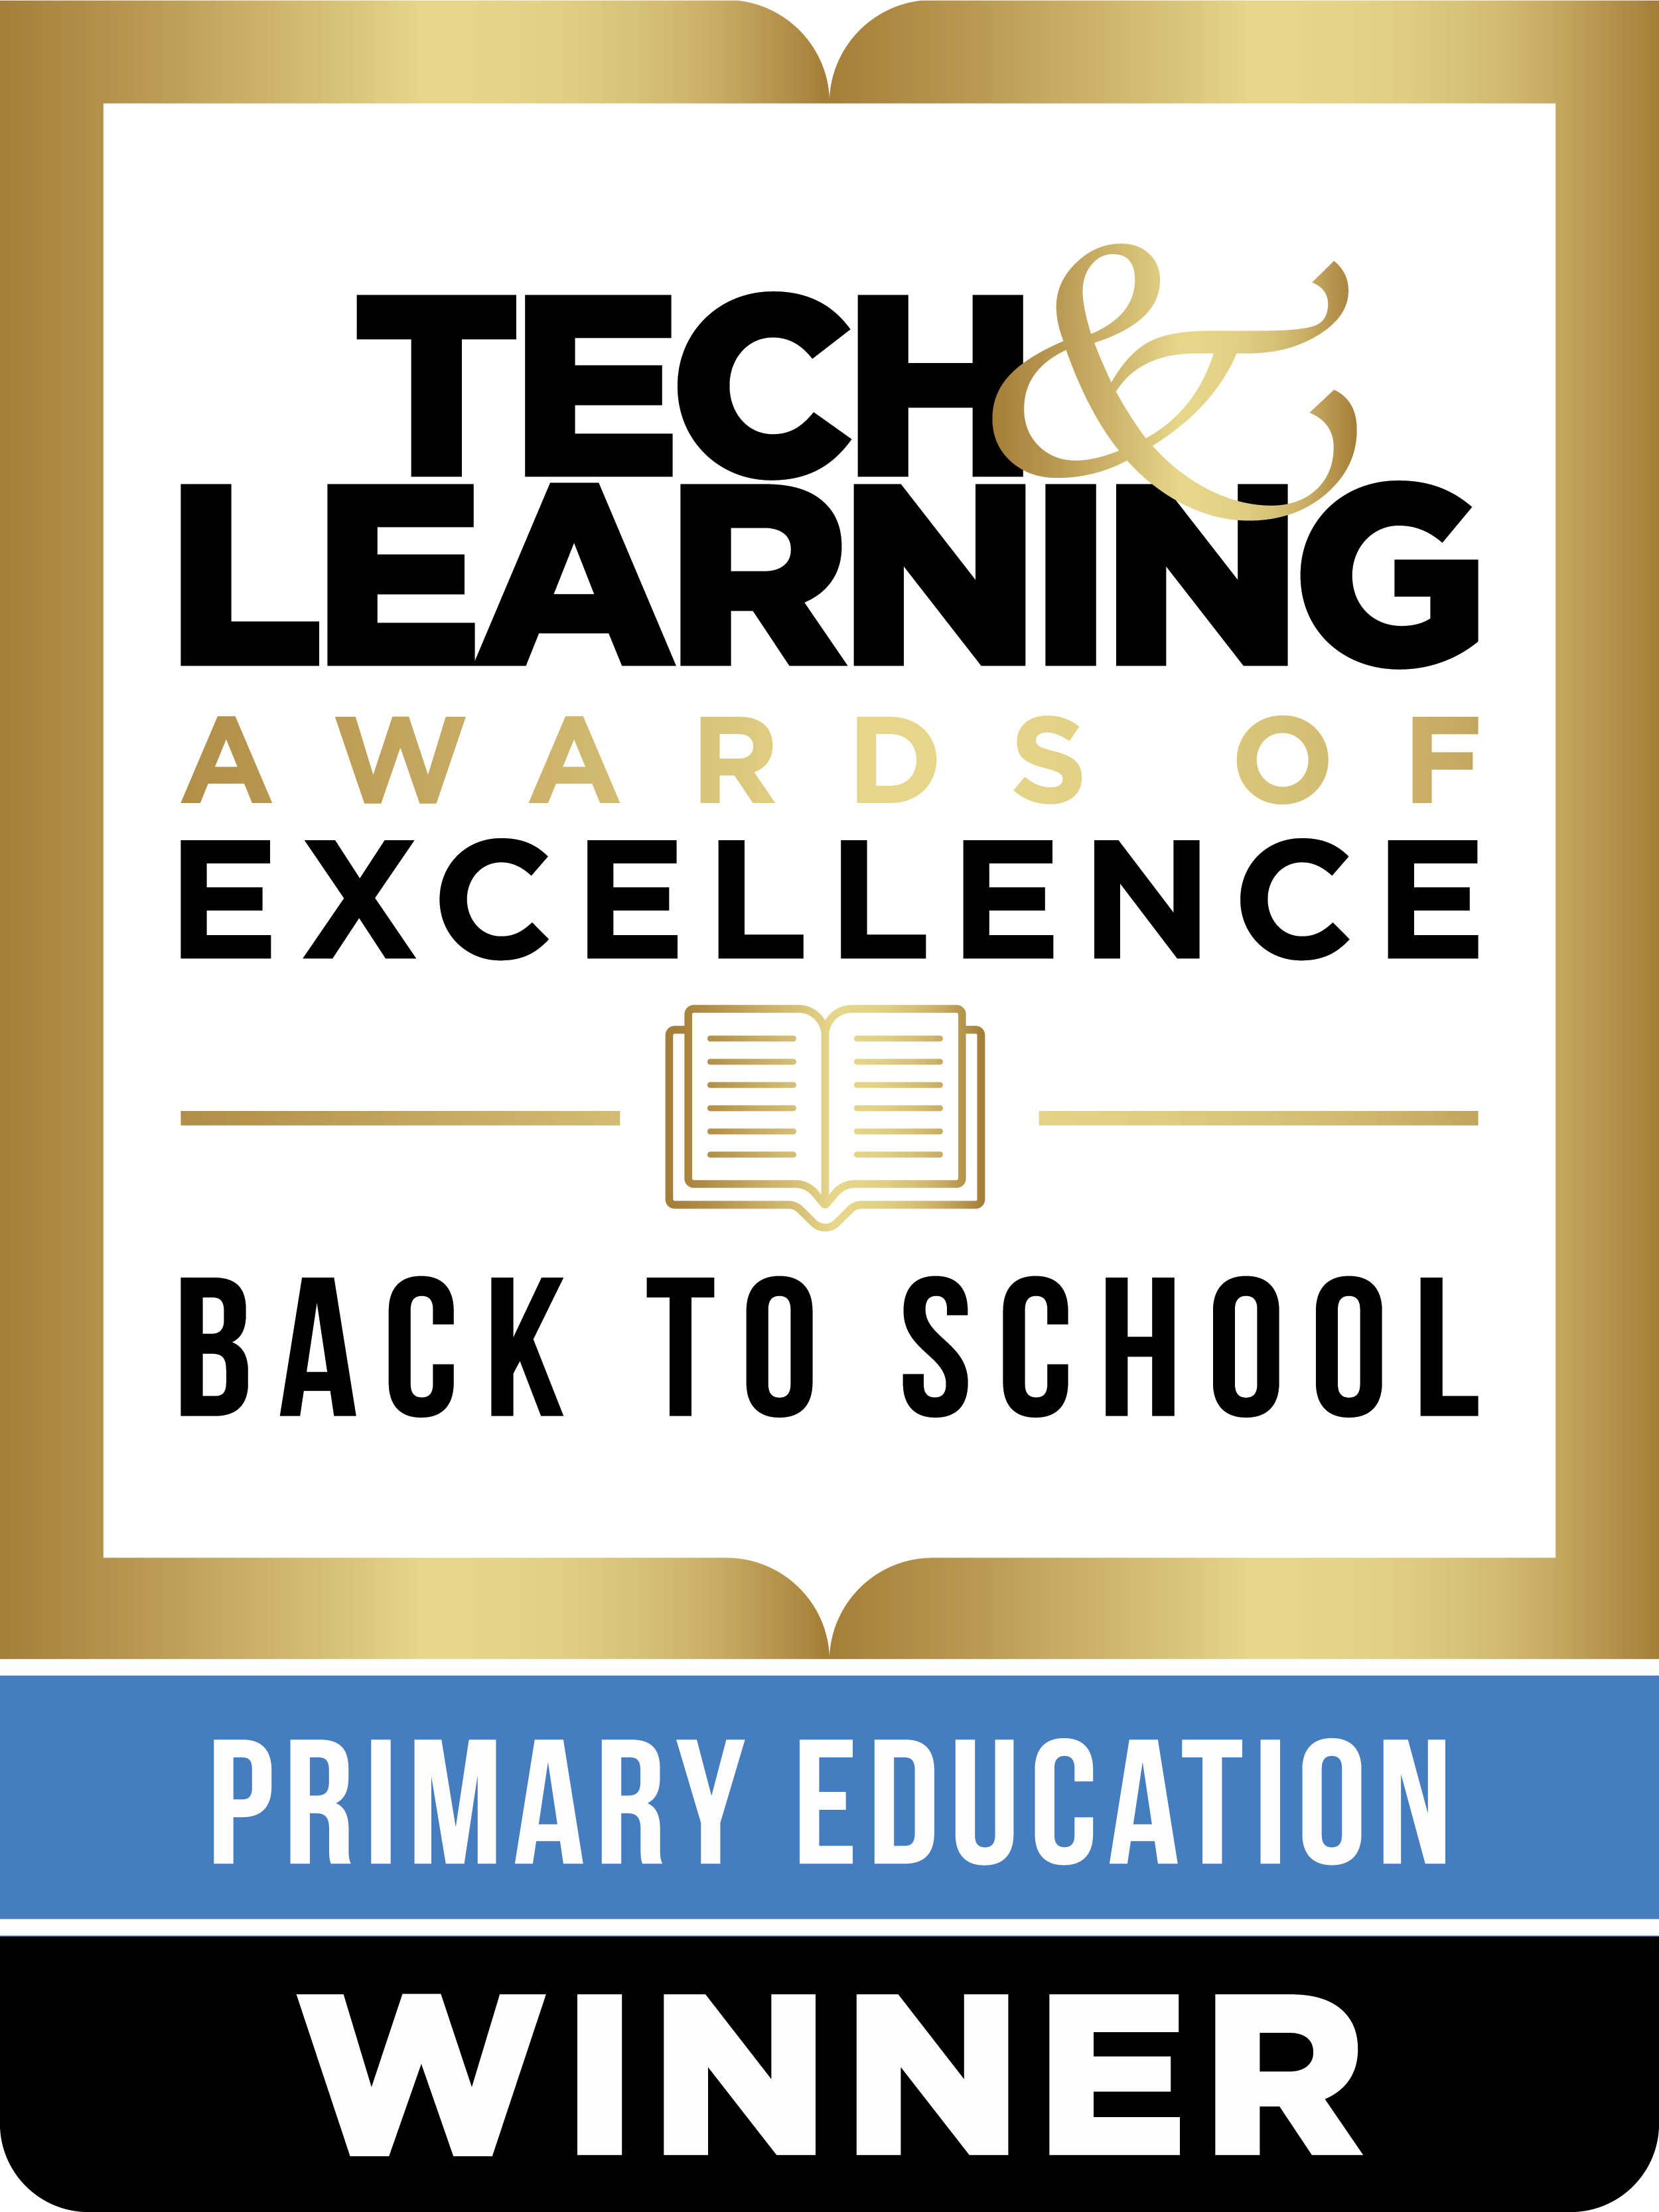 Tech & Learning Awards of Excellence Back to School - Primary Education